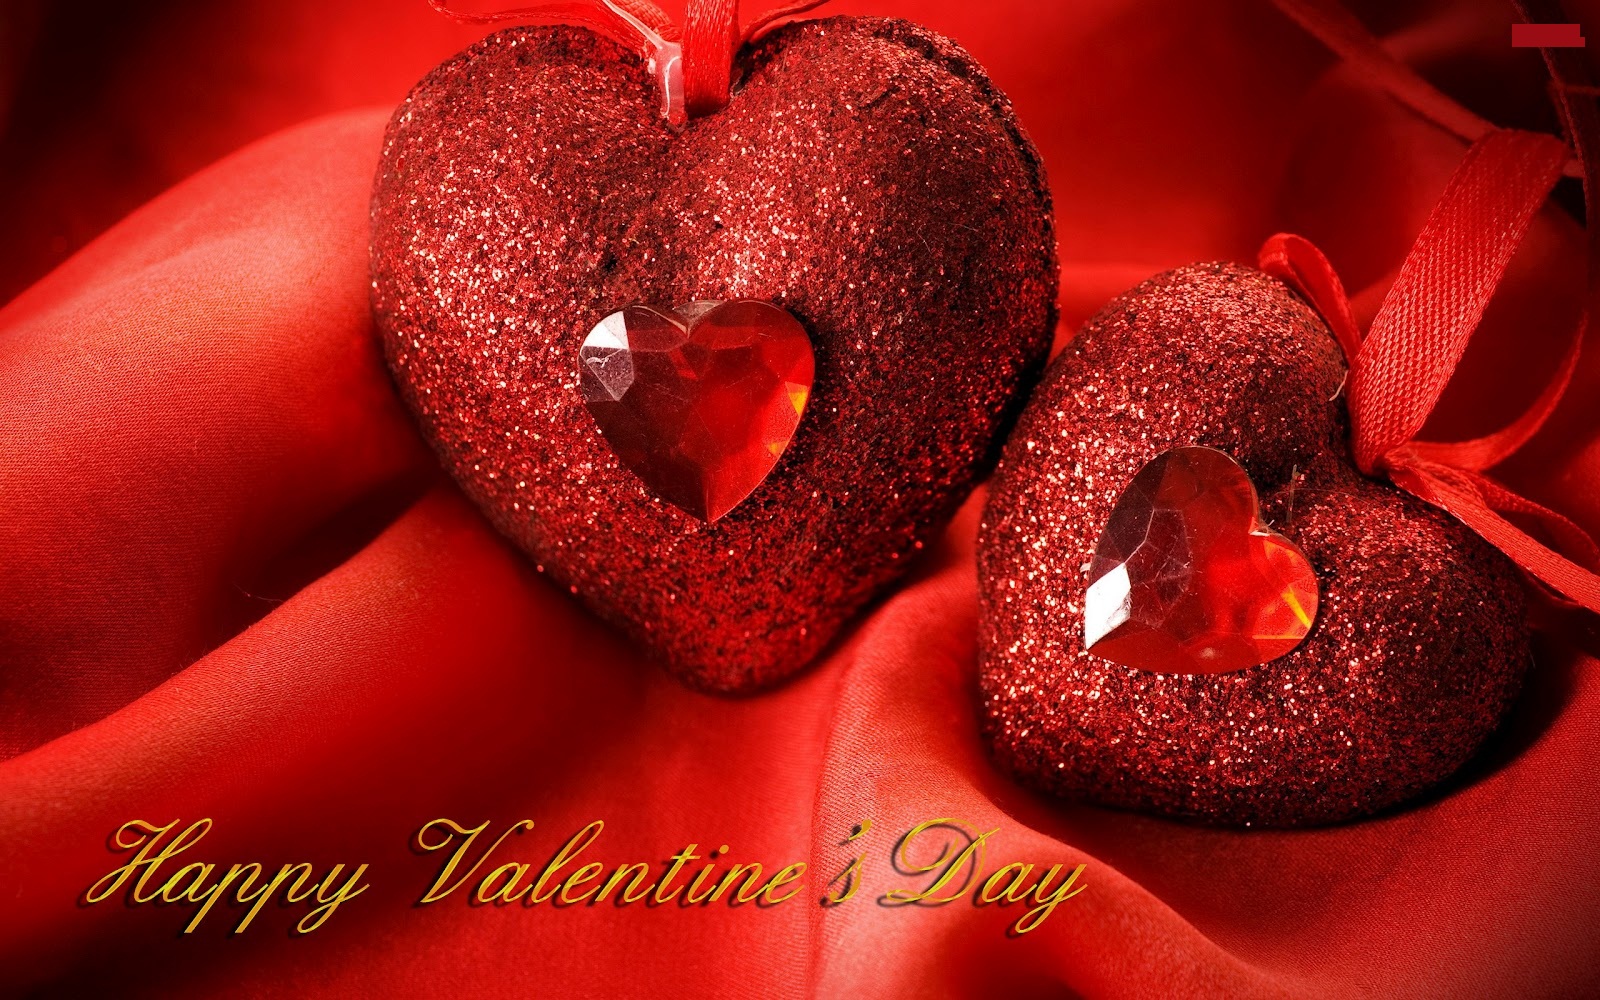 Happy Valentines Day Pictures with red hearts for free download